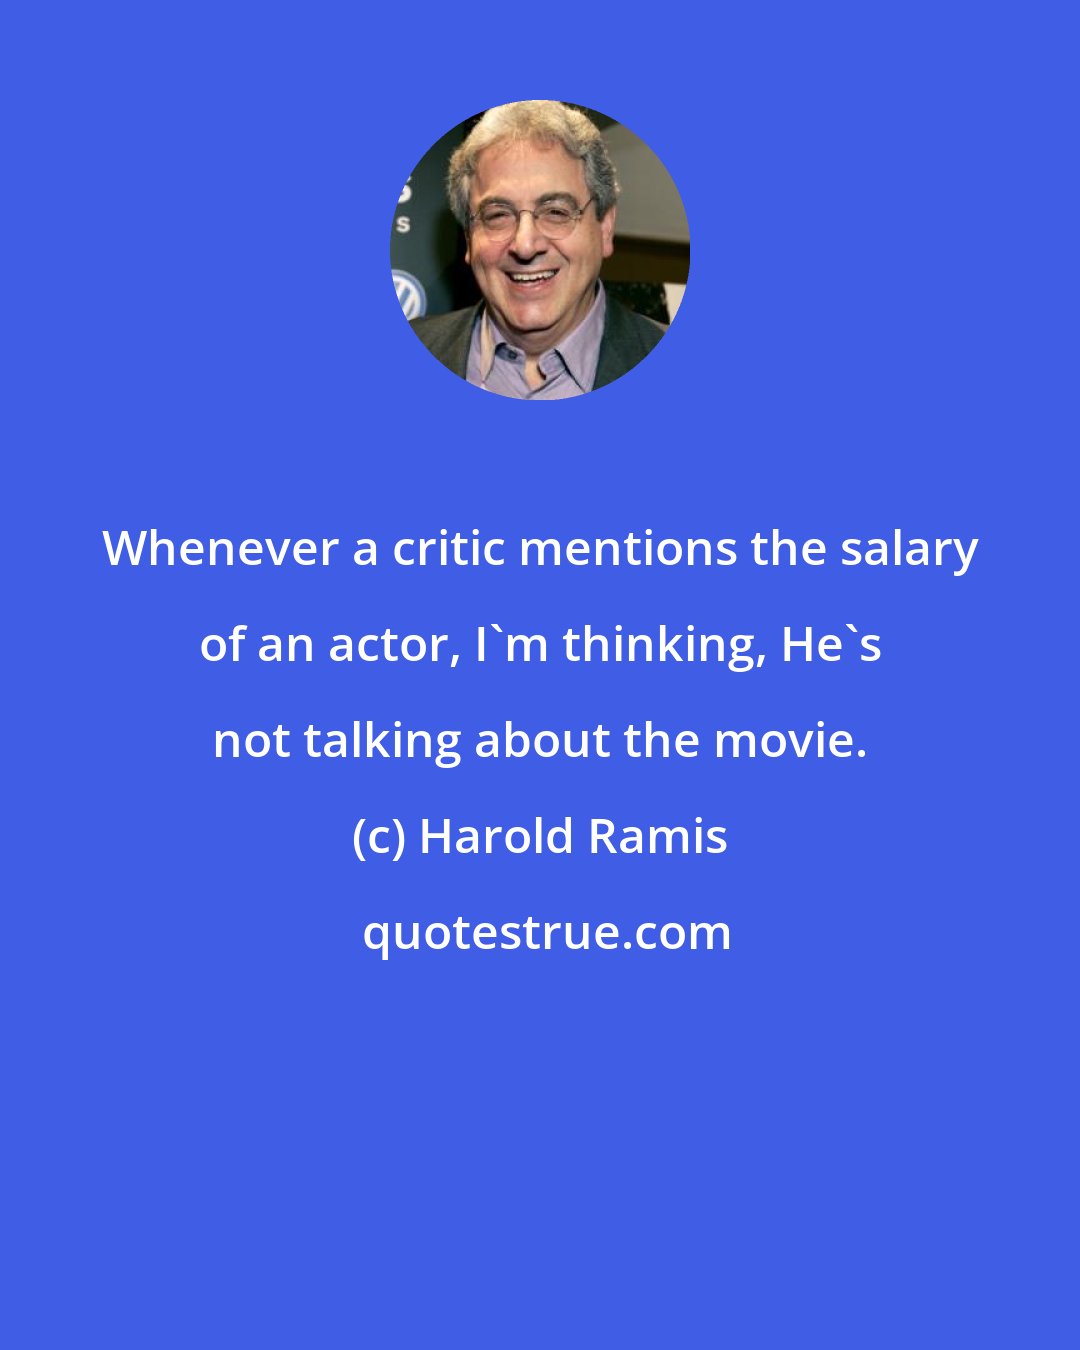 Harold Ramis: Whenever a critic mentions the salary of an actor, I'm thinking, He's not talking about the movie.